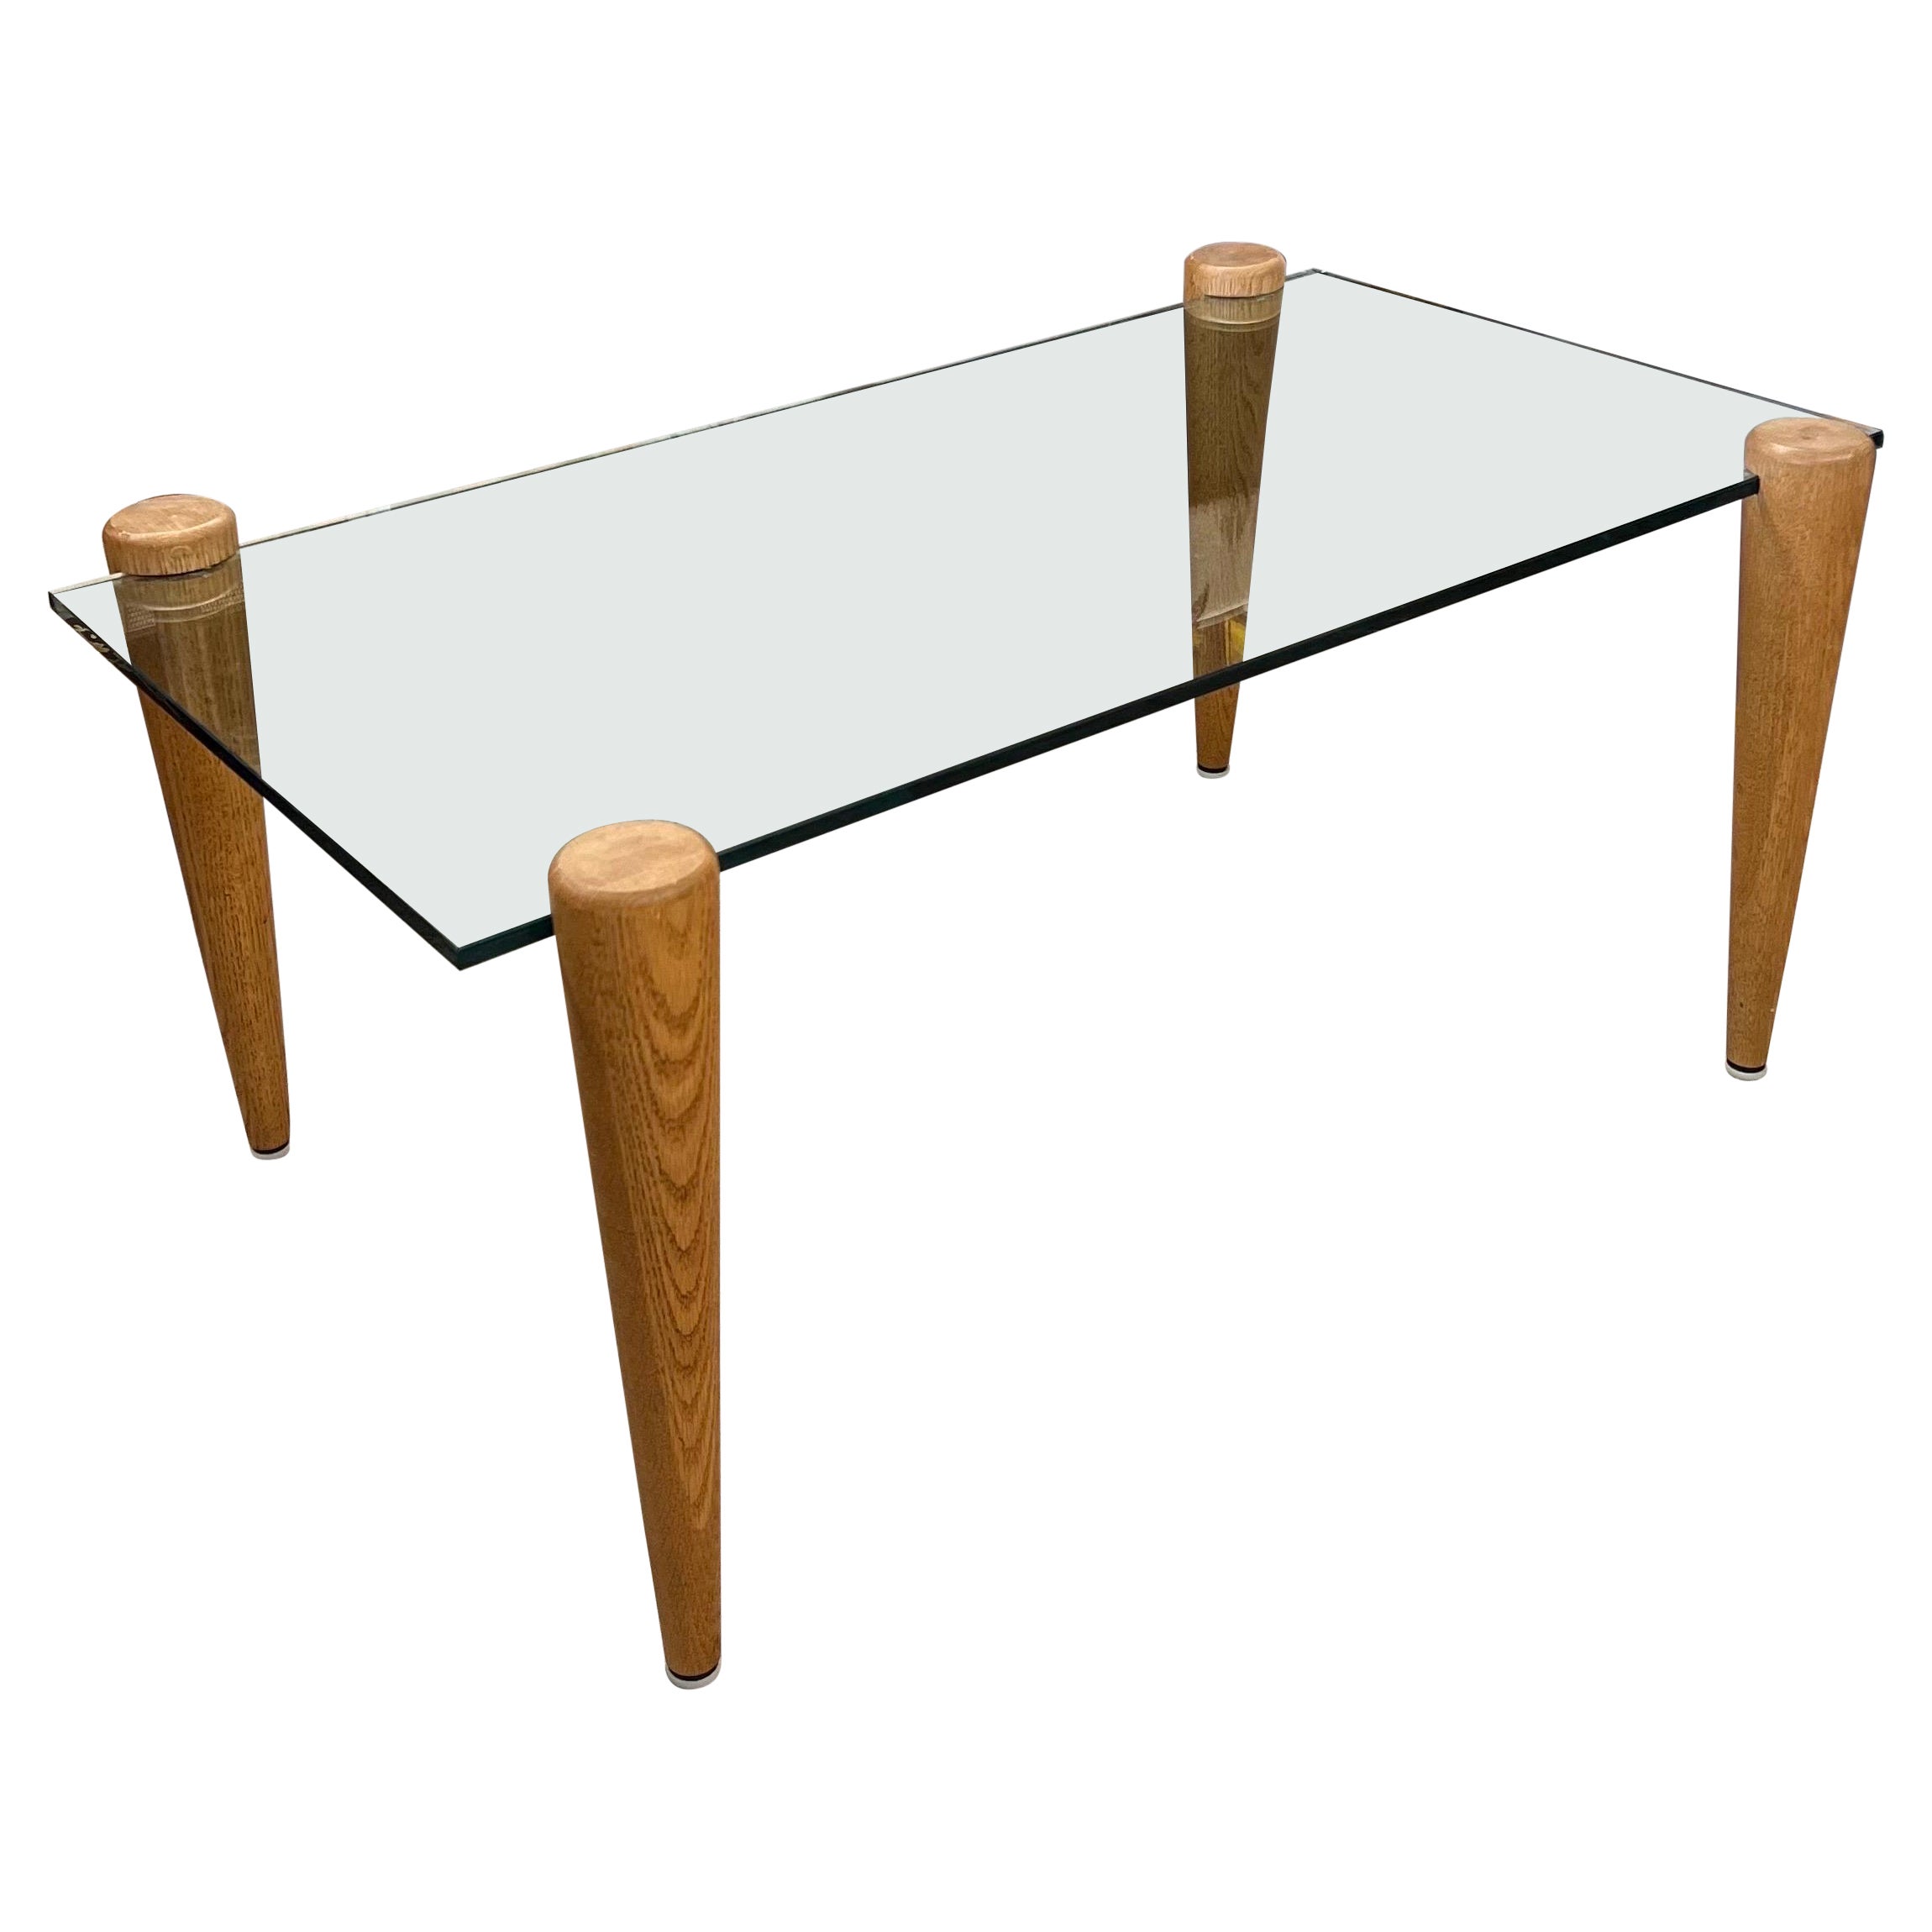 Vintage Mid-Century Modern Coffee Table with Glass Top Solid Wood Legs